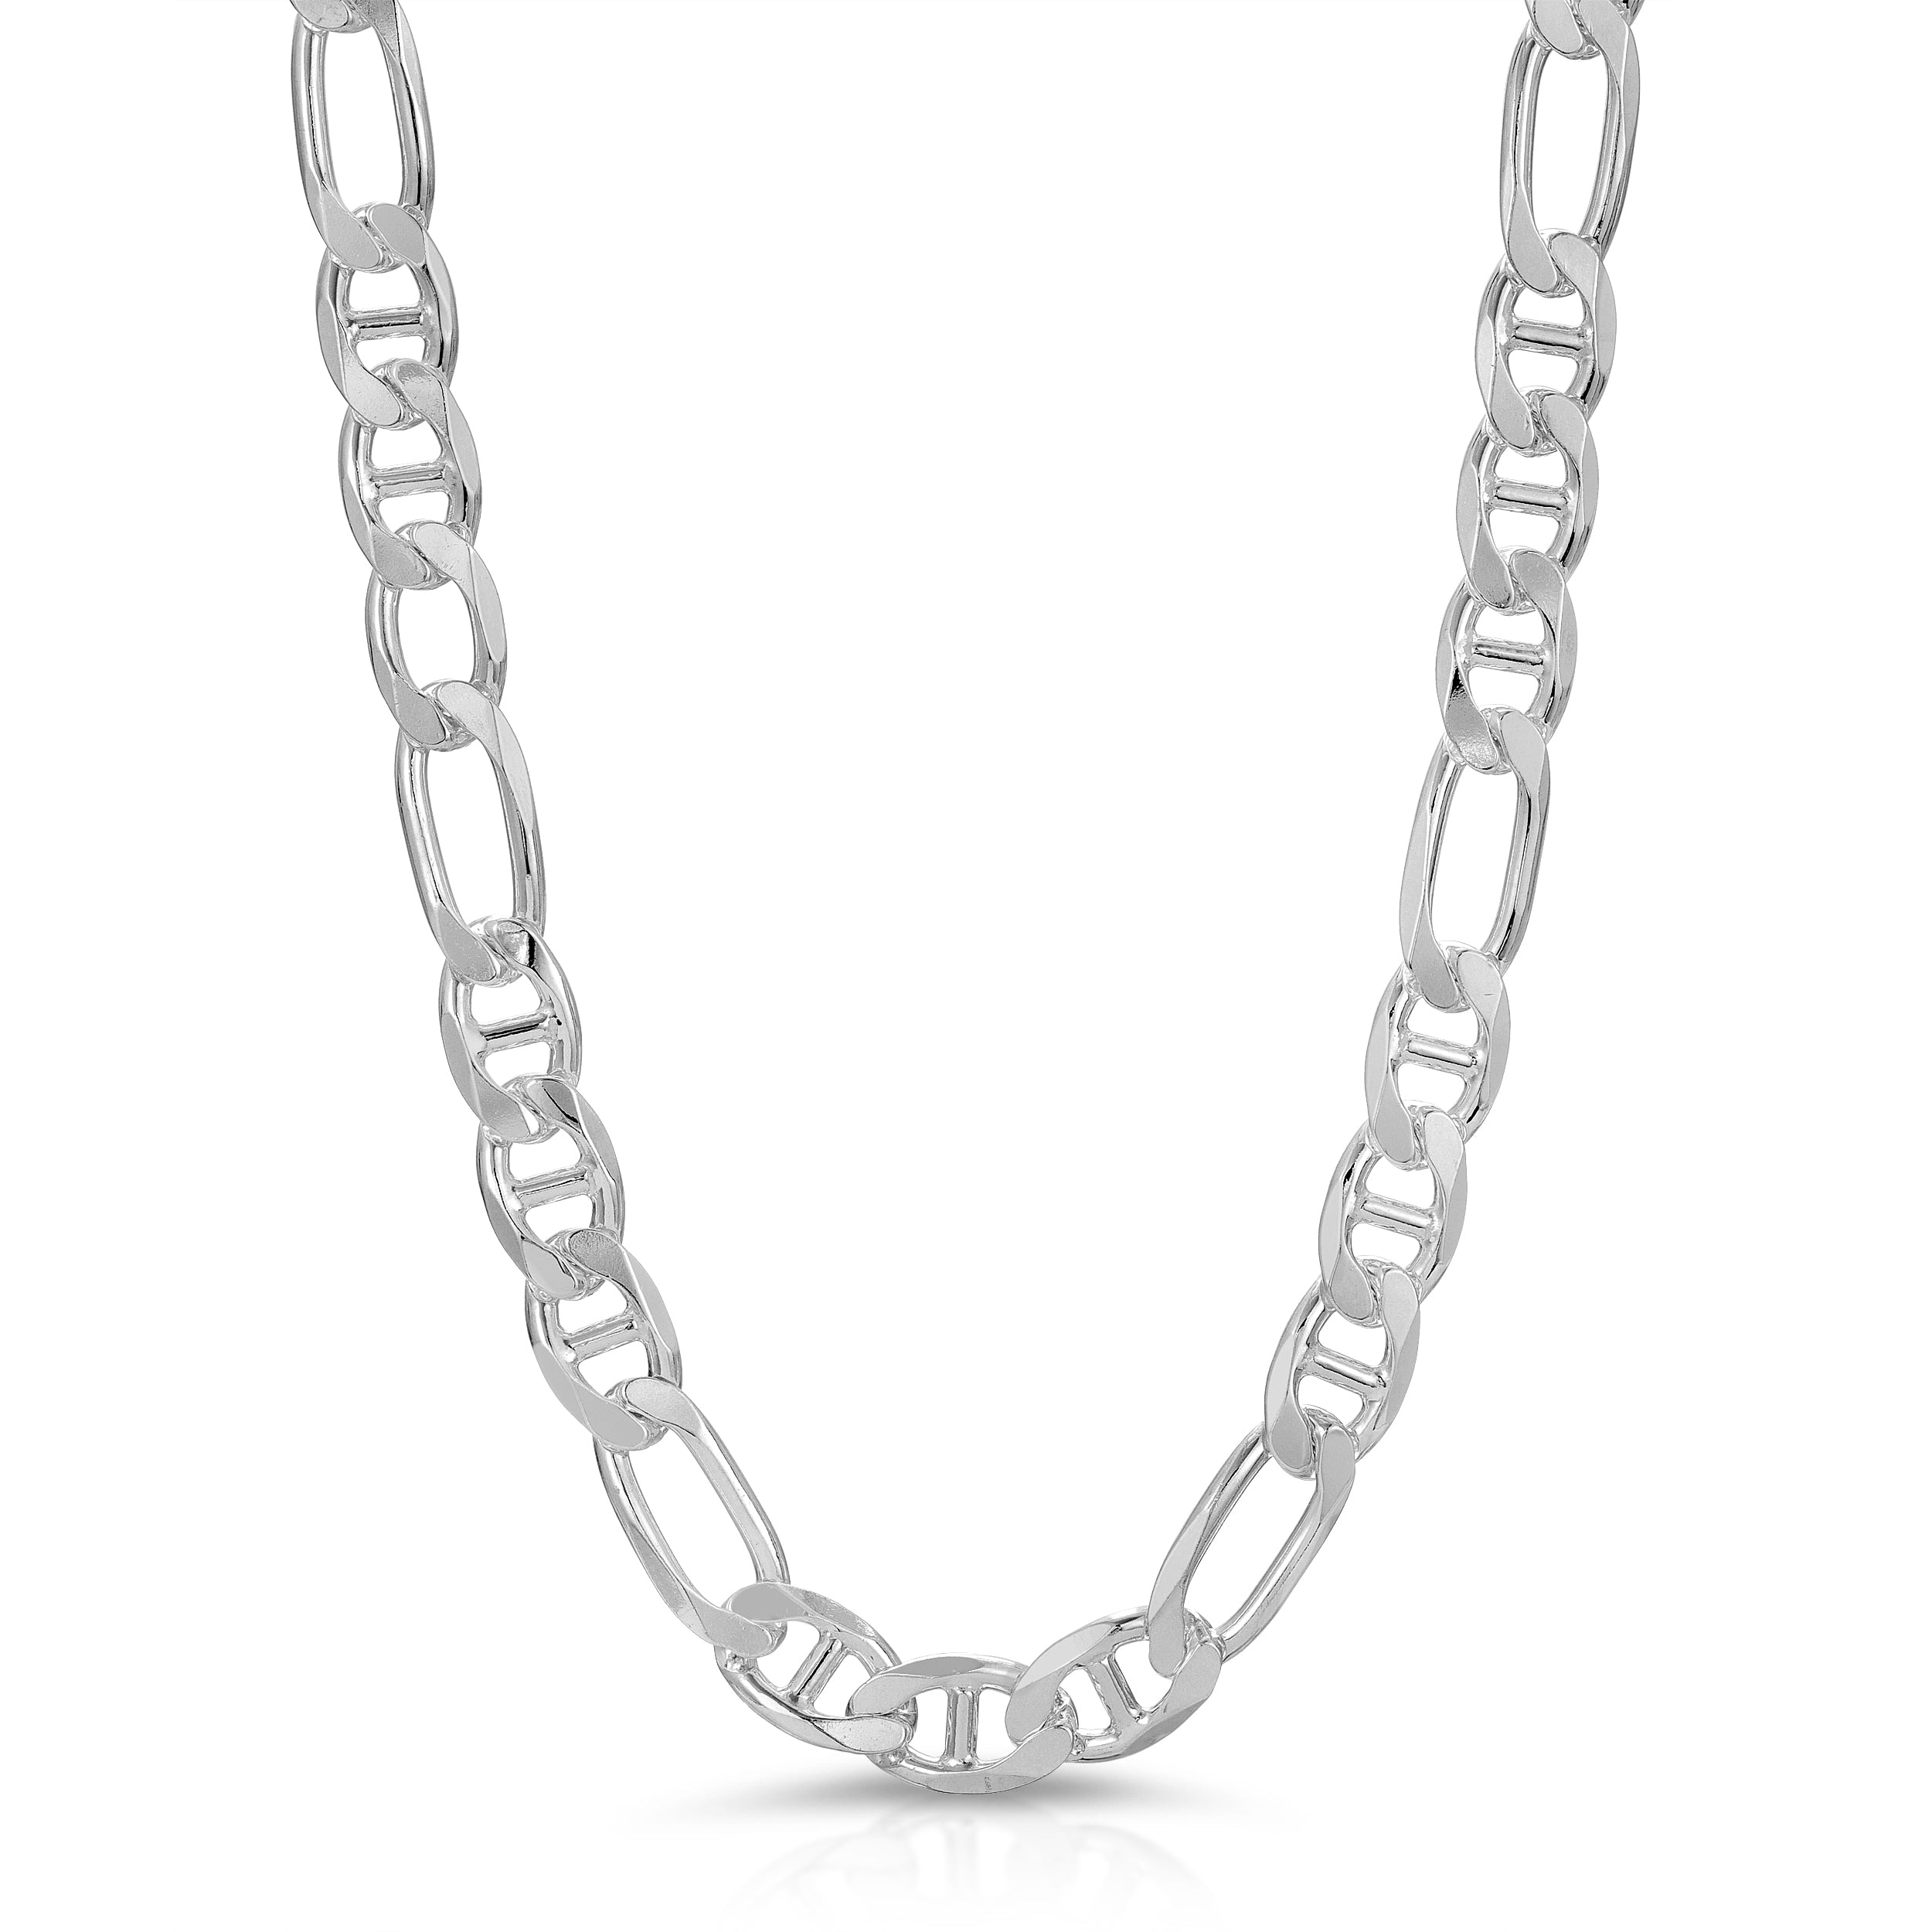 Figarucci Chains sterling silver 925